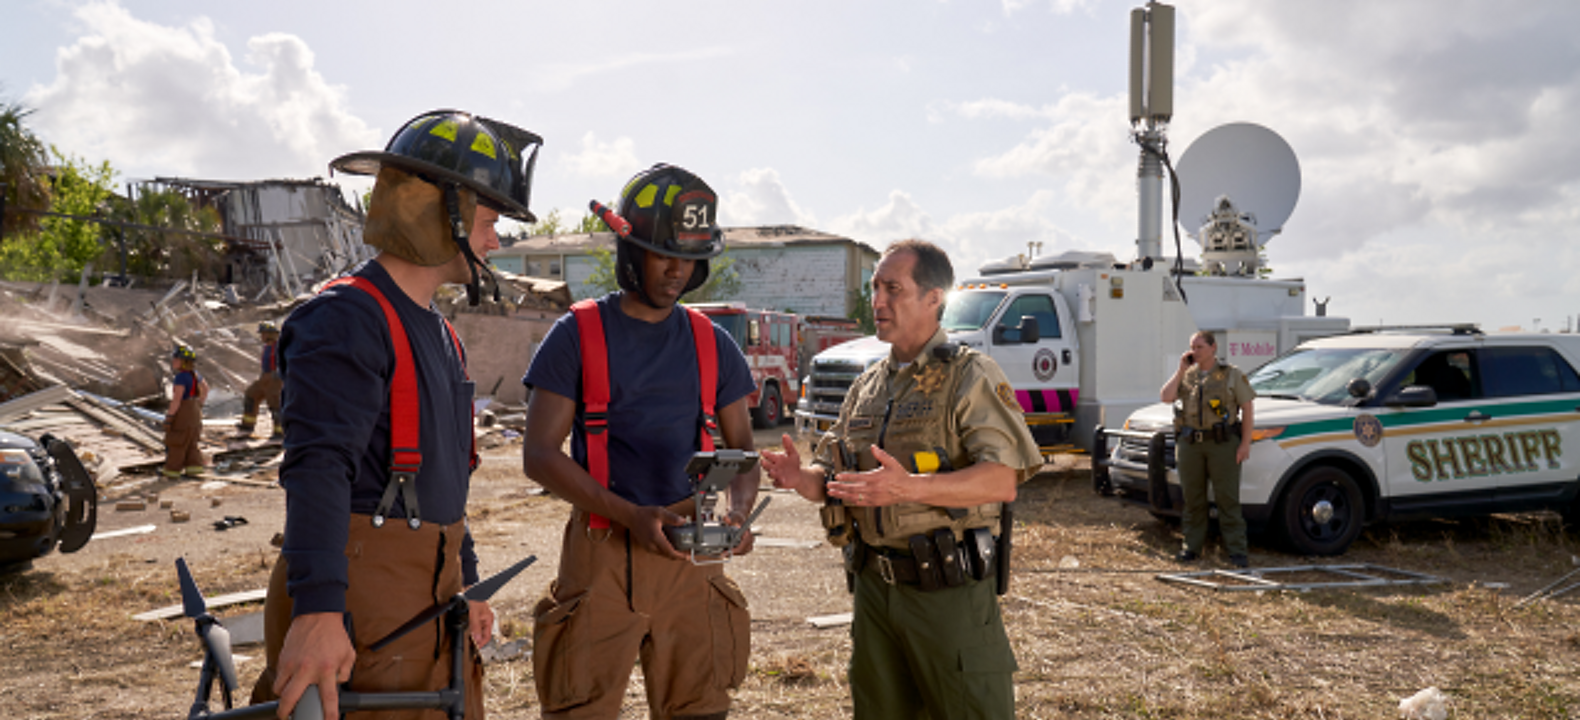 Two firefighters holding a drone and its controller speak with a sheriff at a disaster response site. 